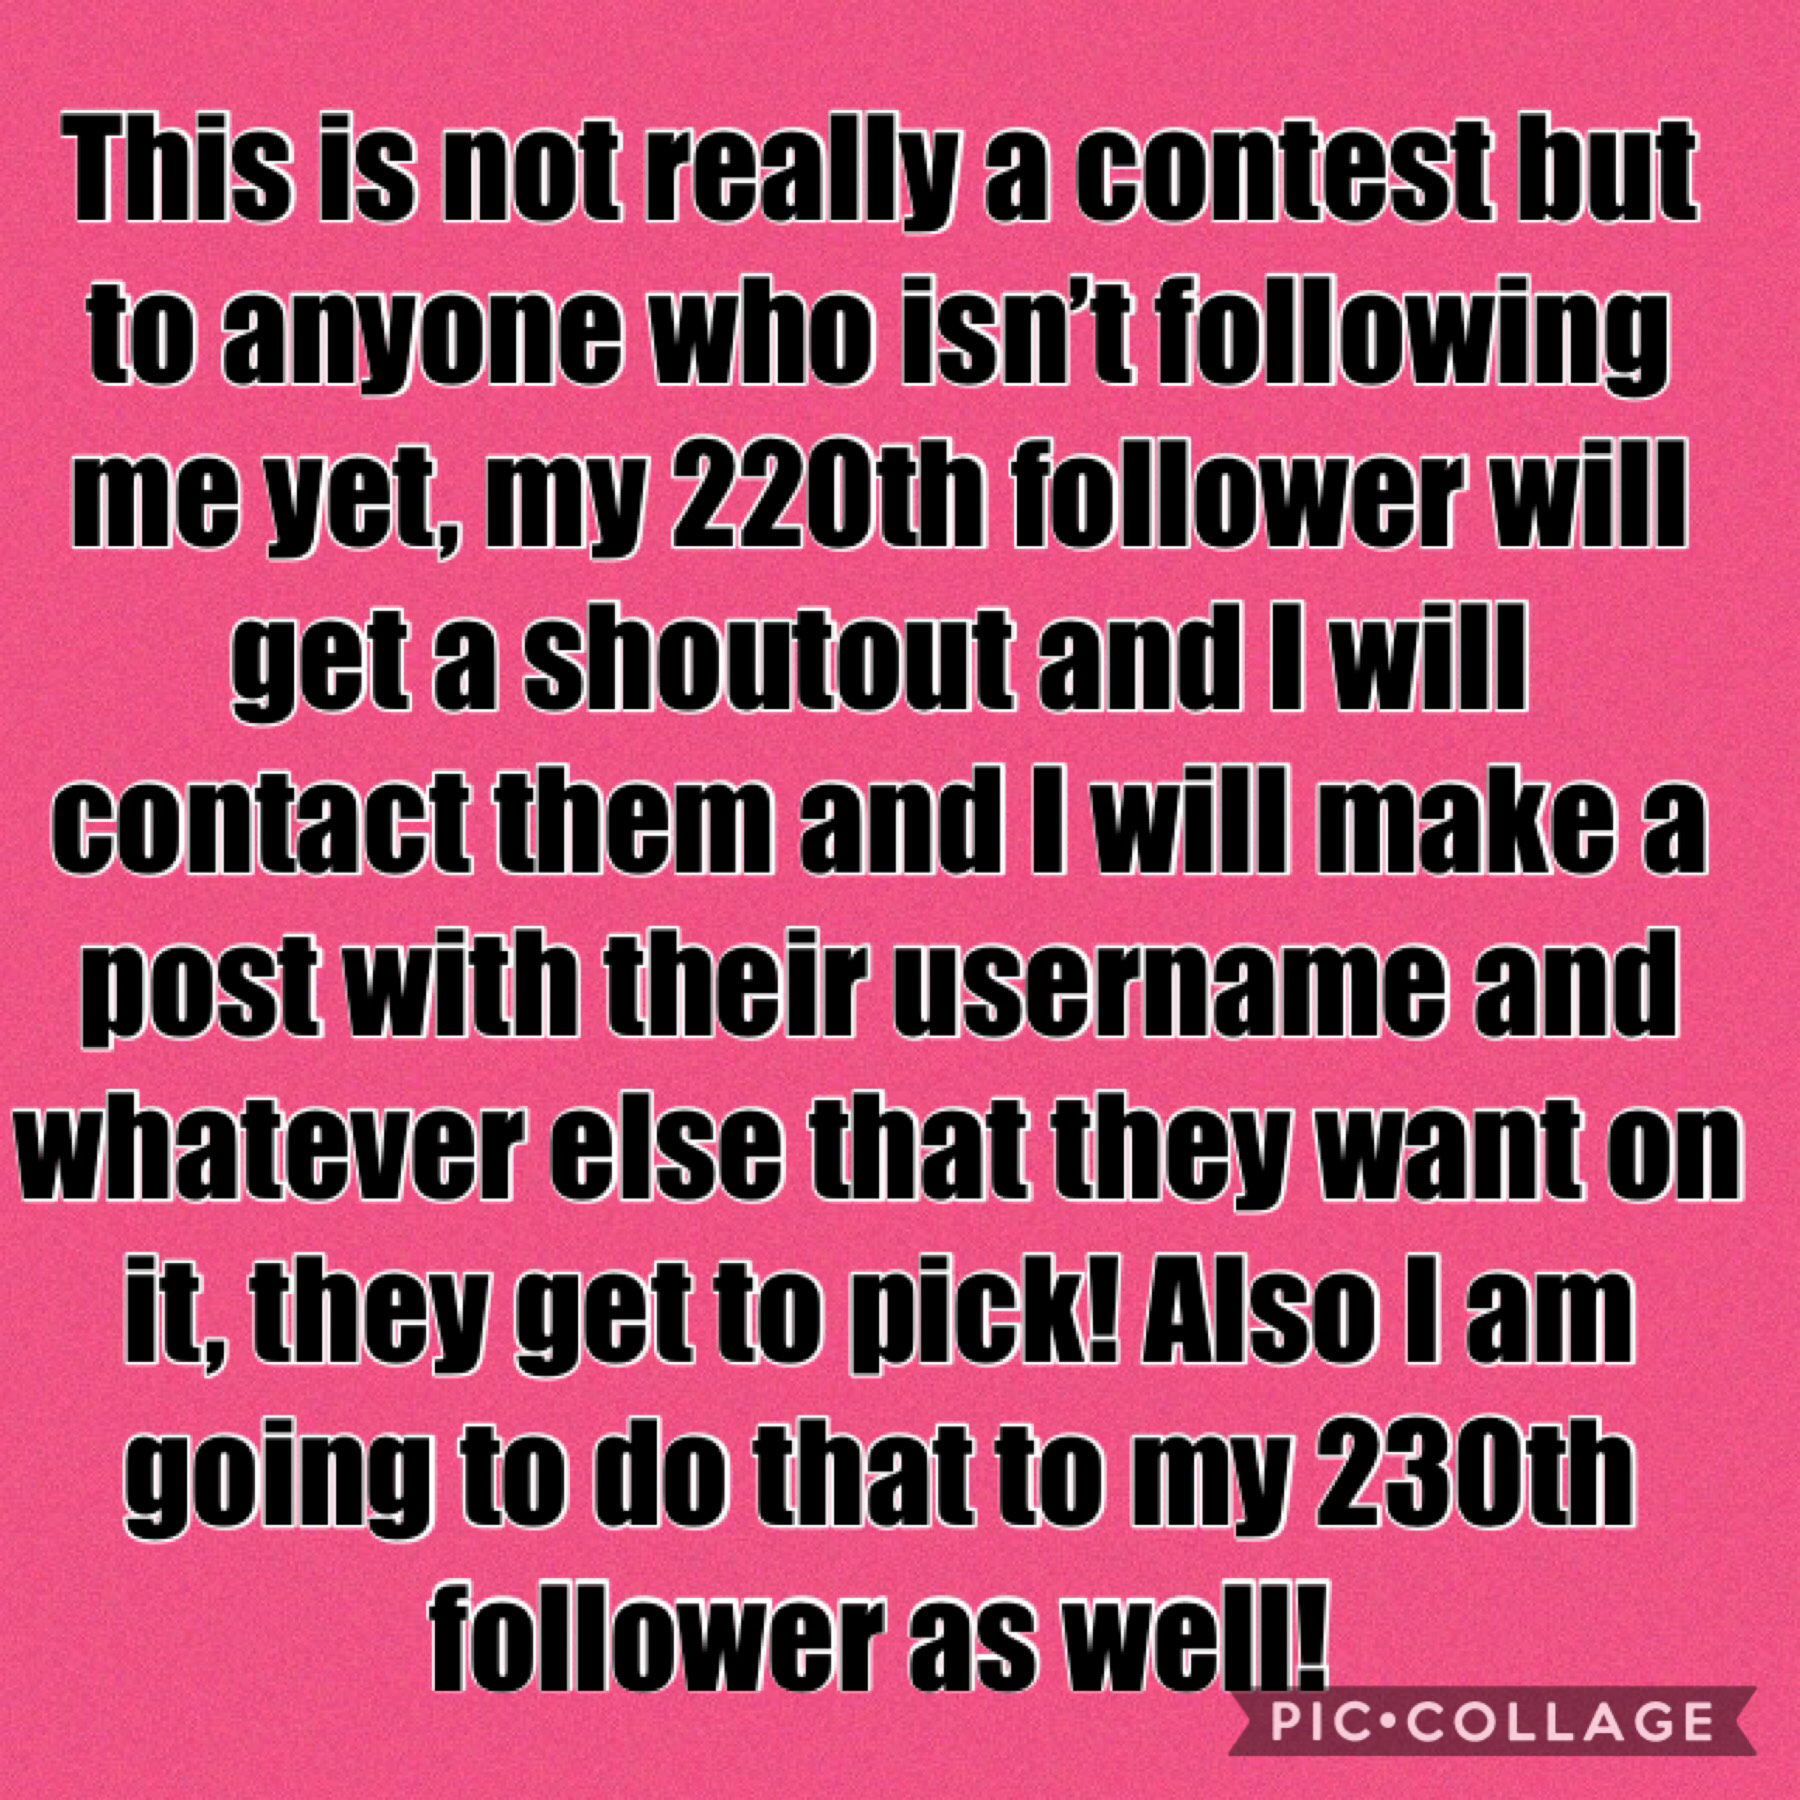 Please follow me if you are not already, come get a shoutout and post!